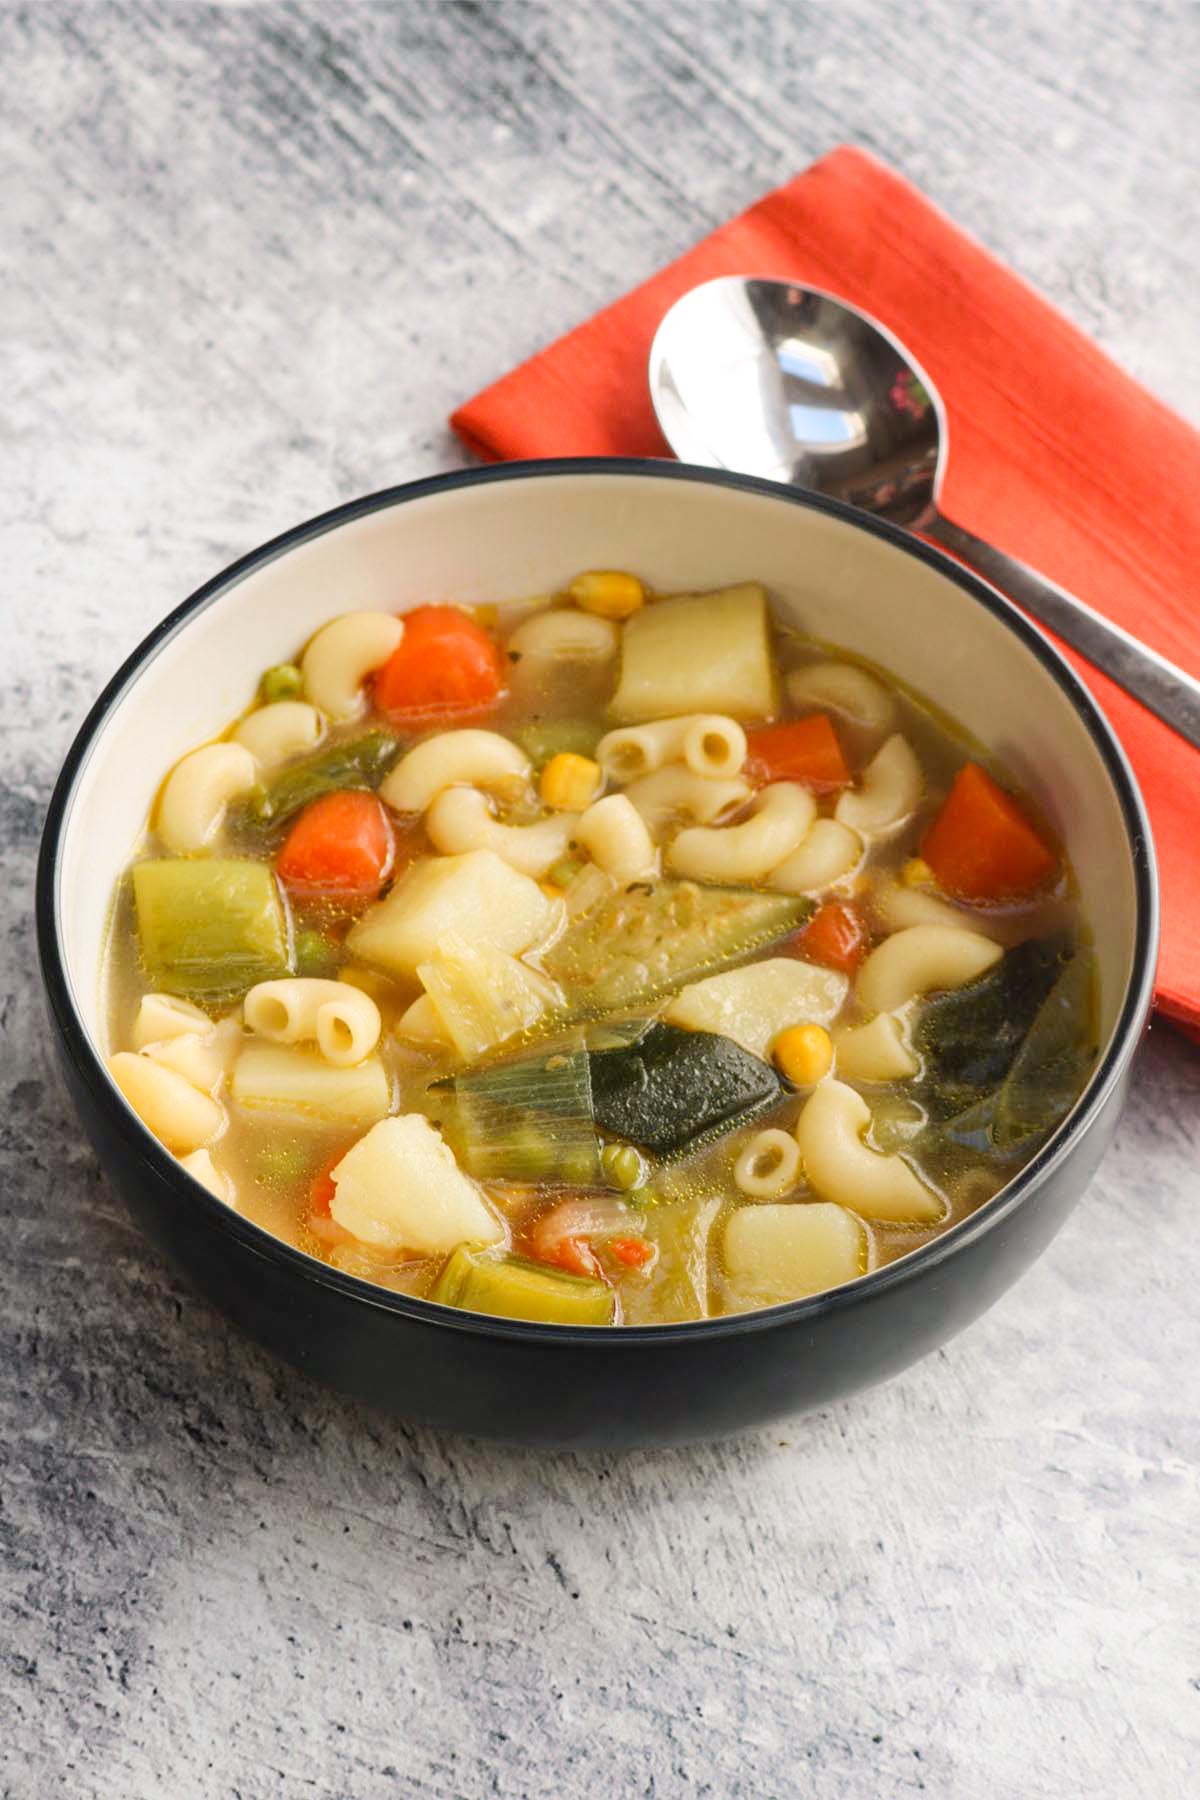 chunky vegetable and pasta soup in a bowl with a spoon and orange napkin